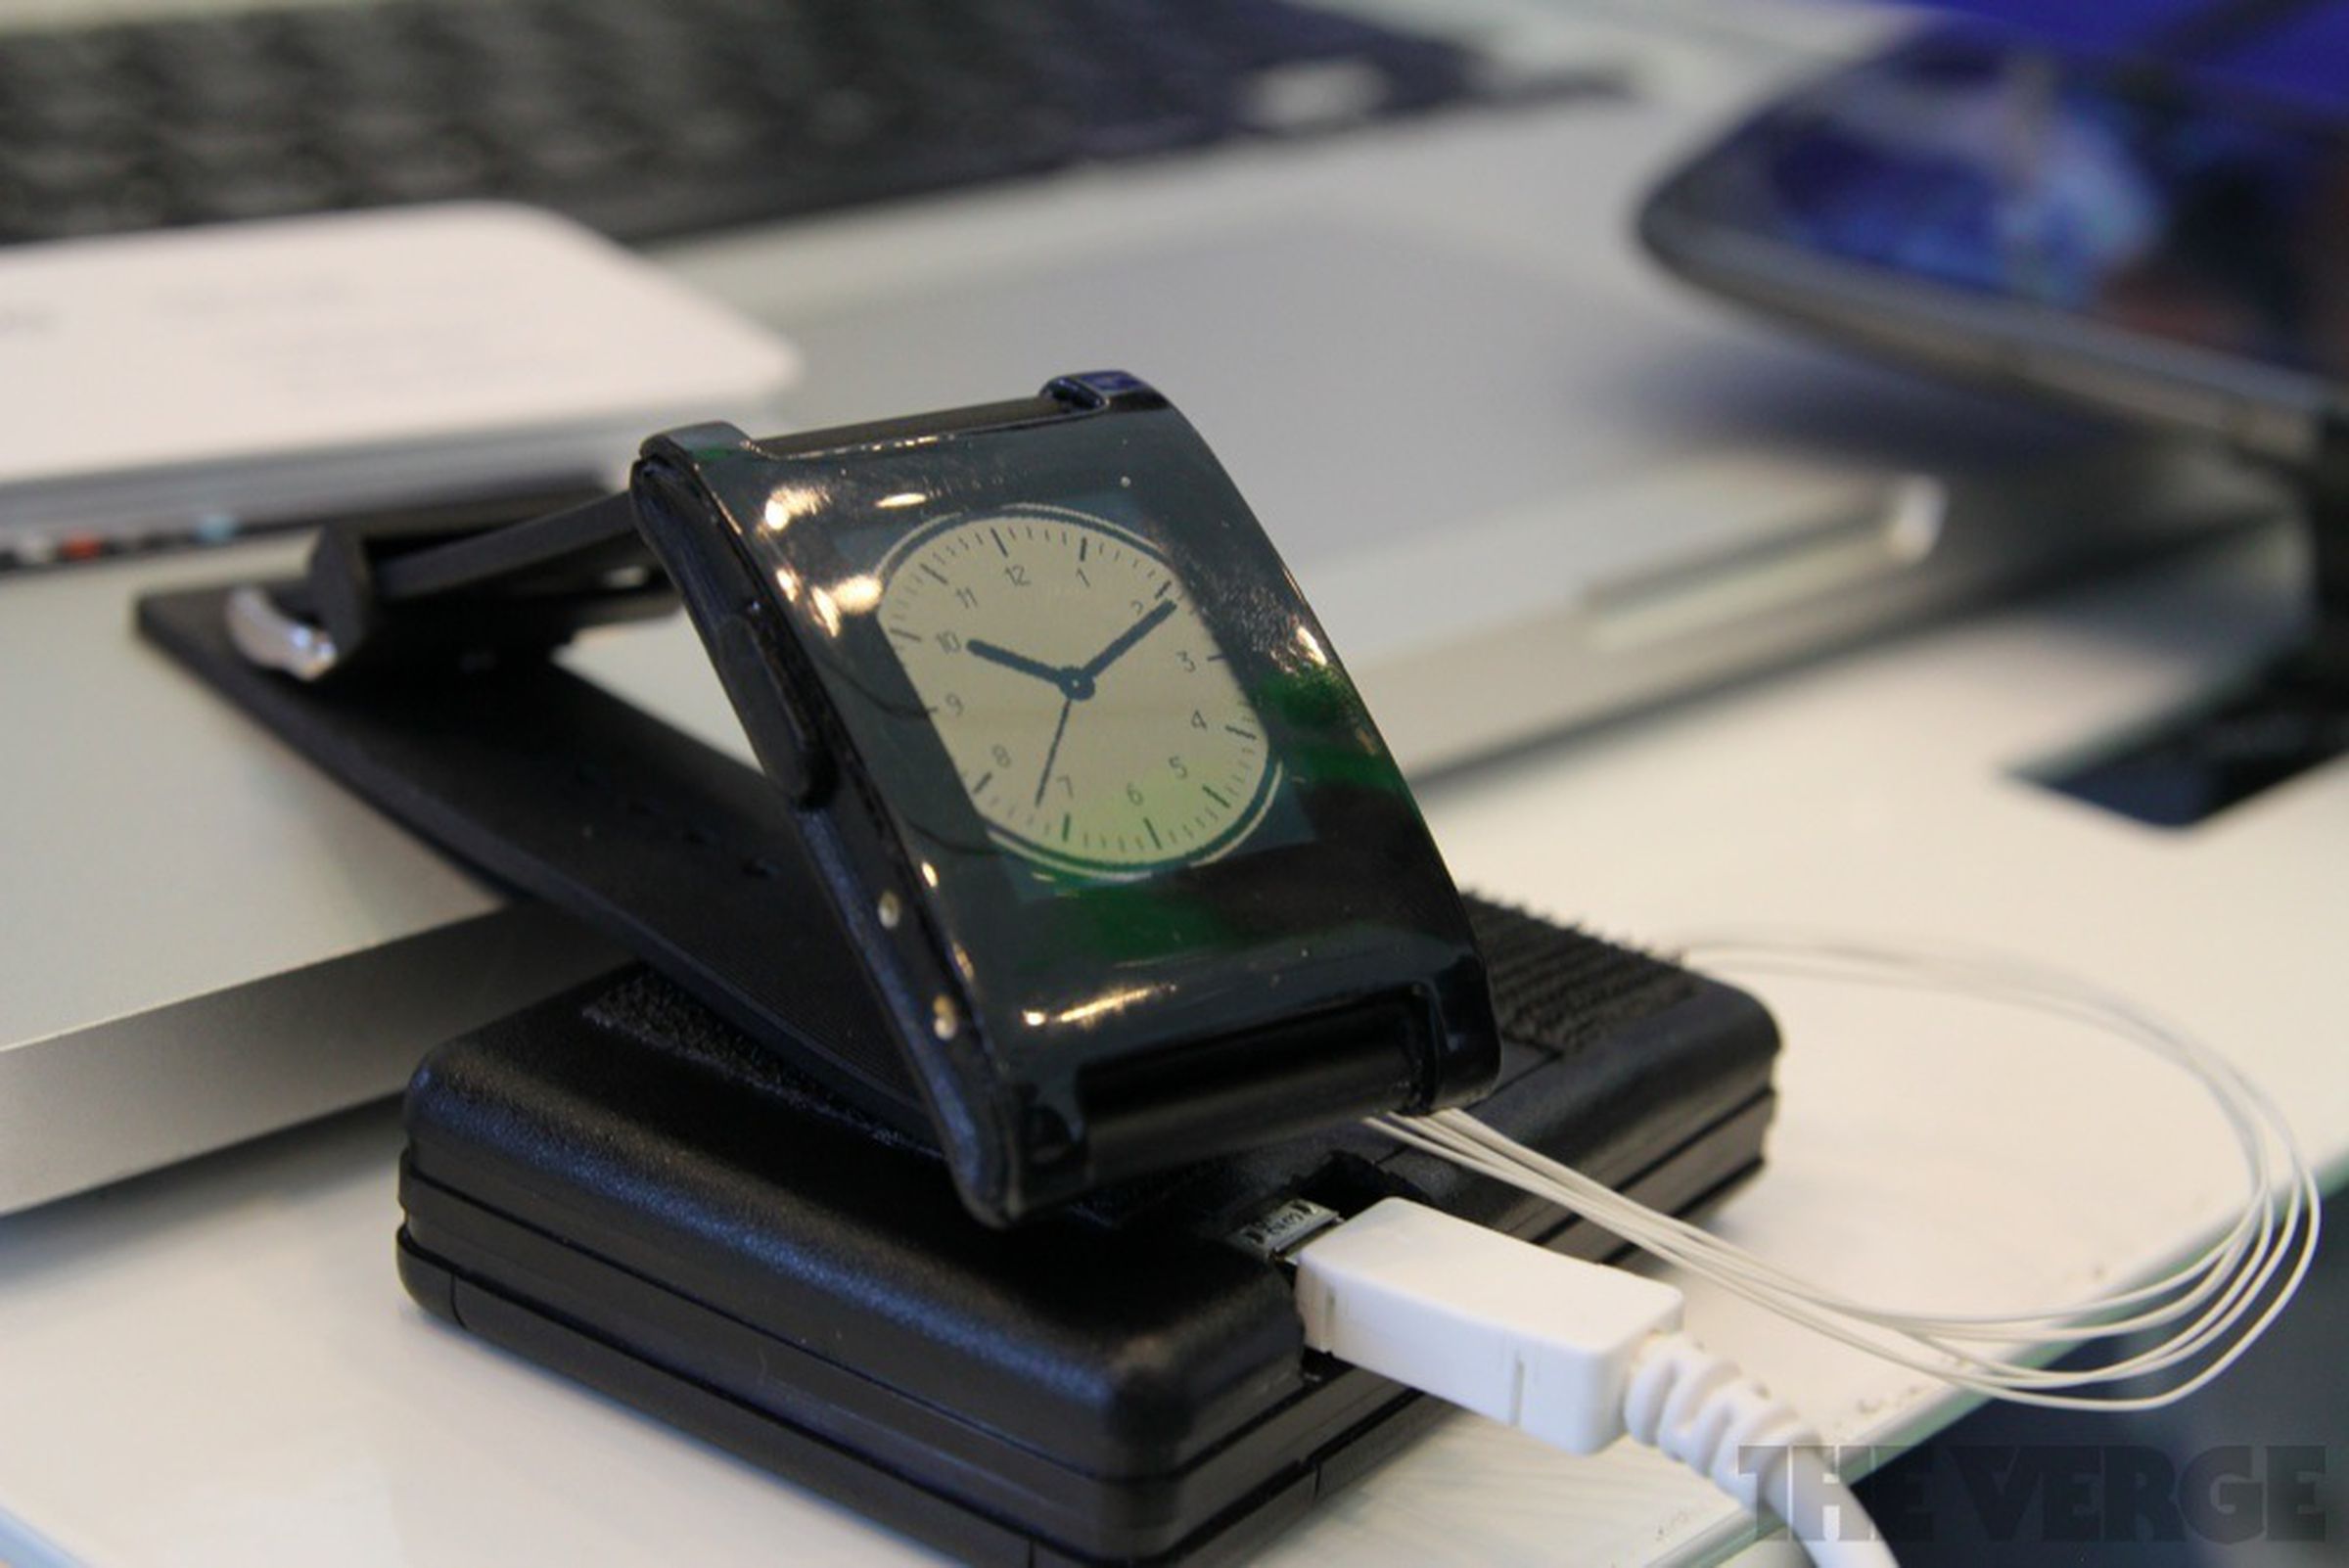 Pebble e-paper watch at Google I/O gallery